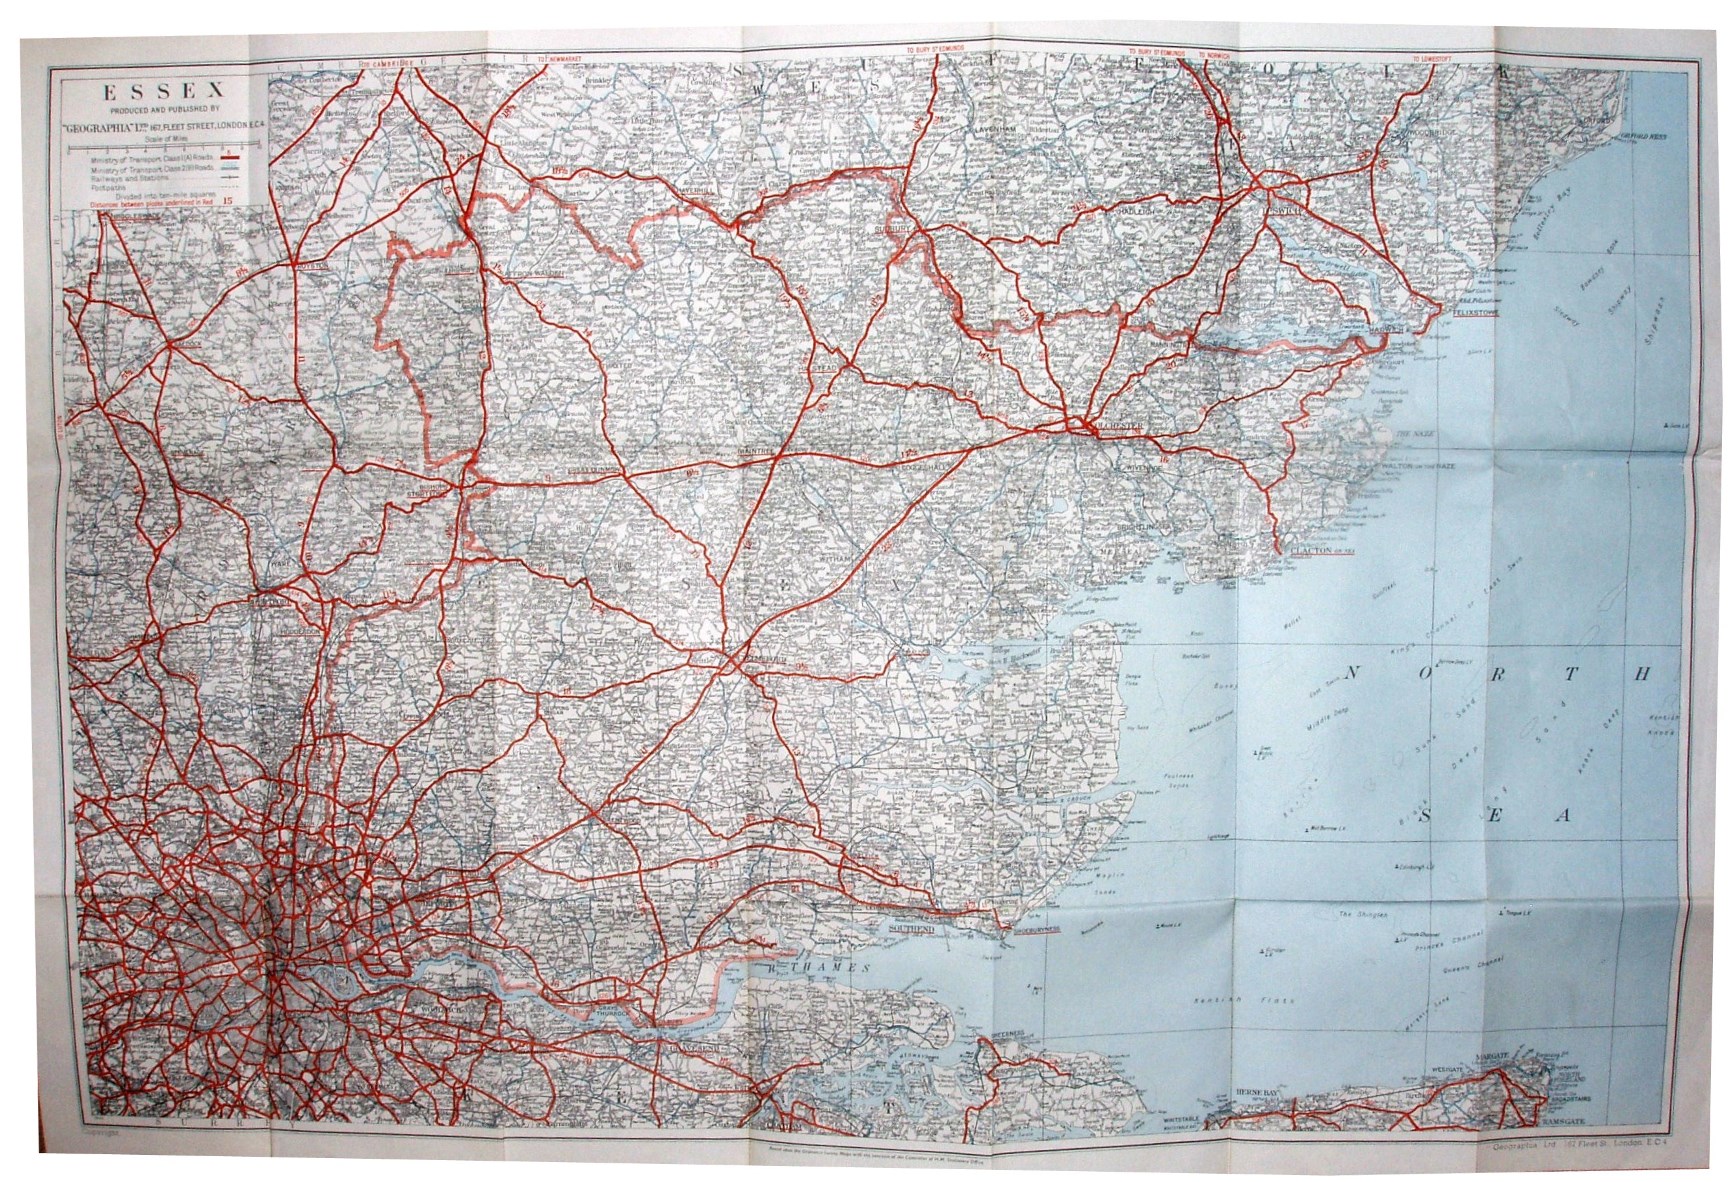 Geographia Large Scale Road Map of Essex, 1952